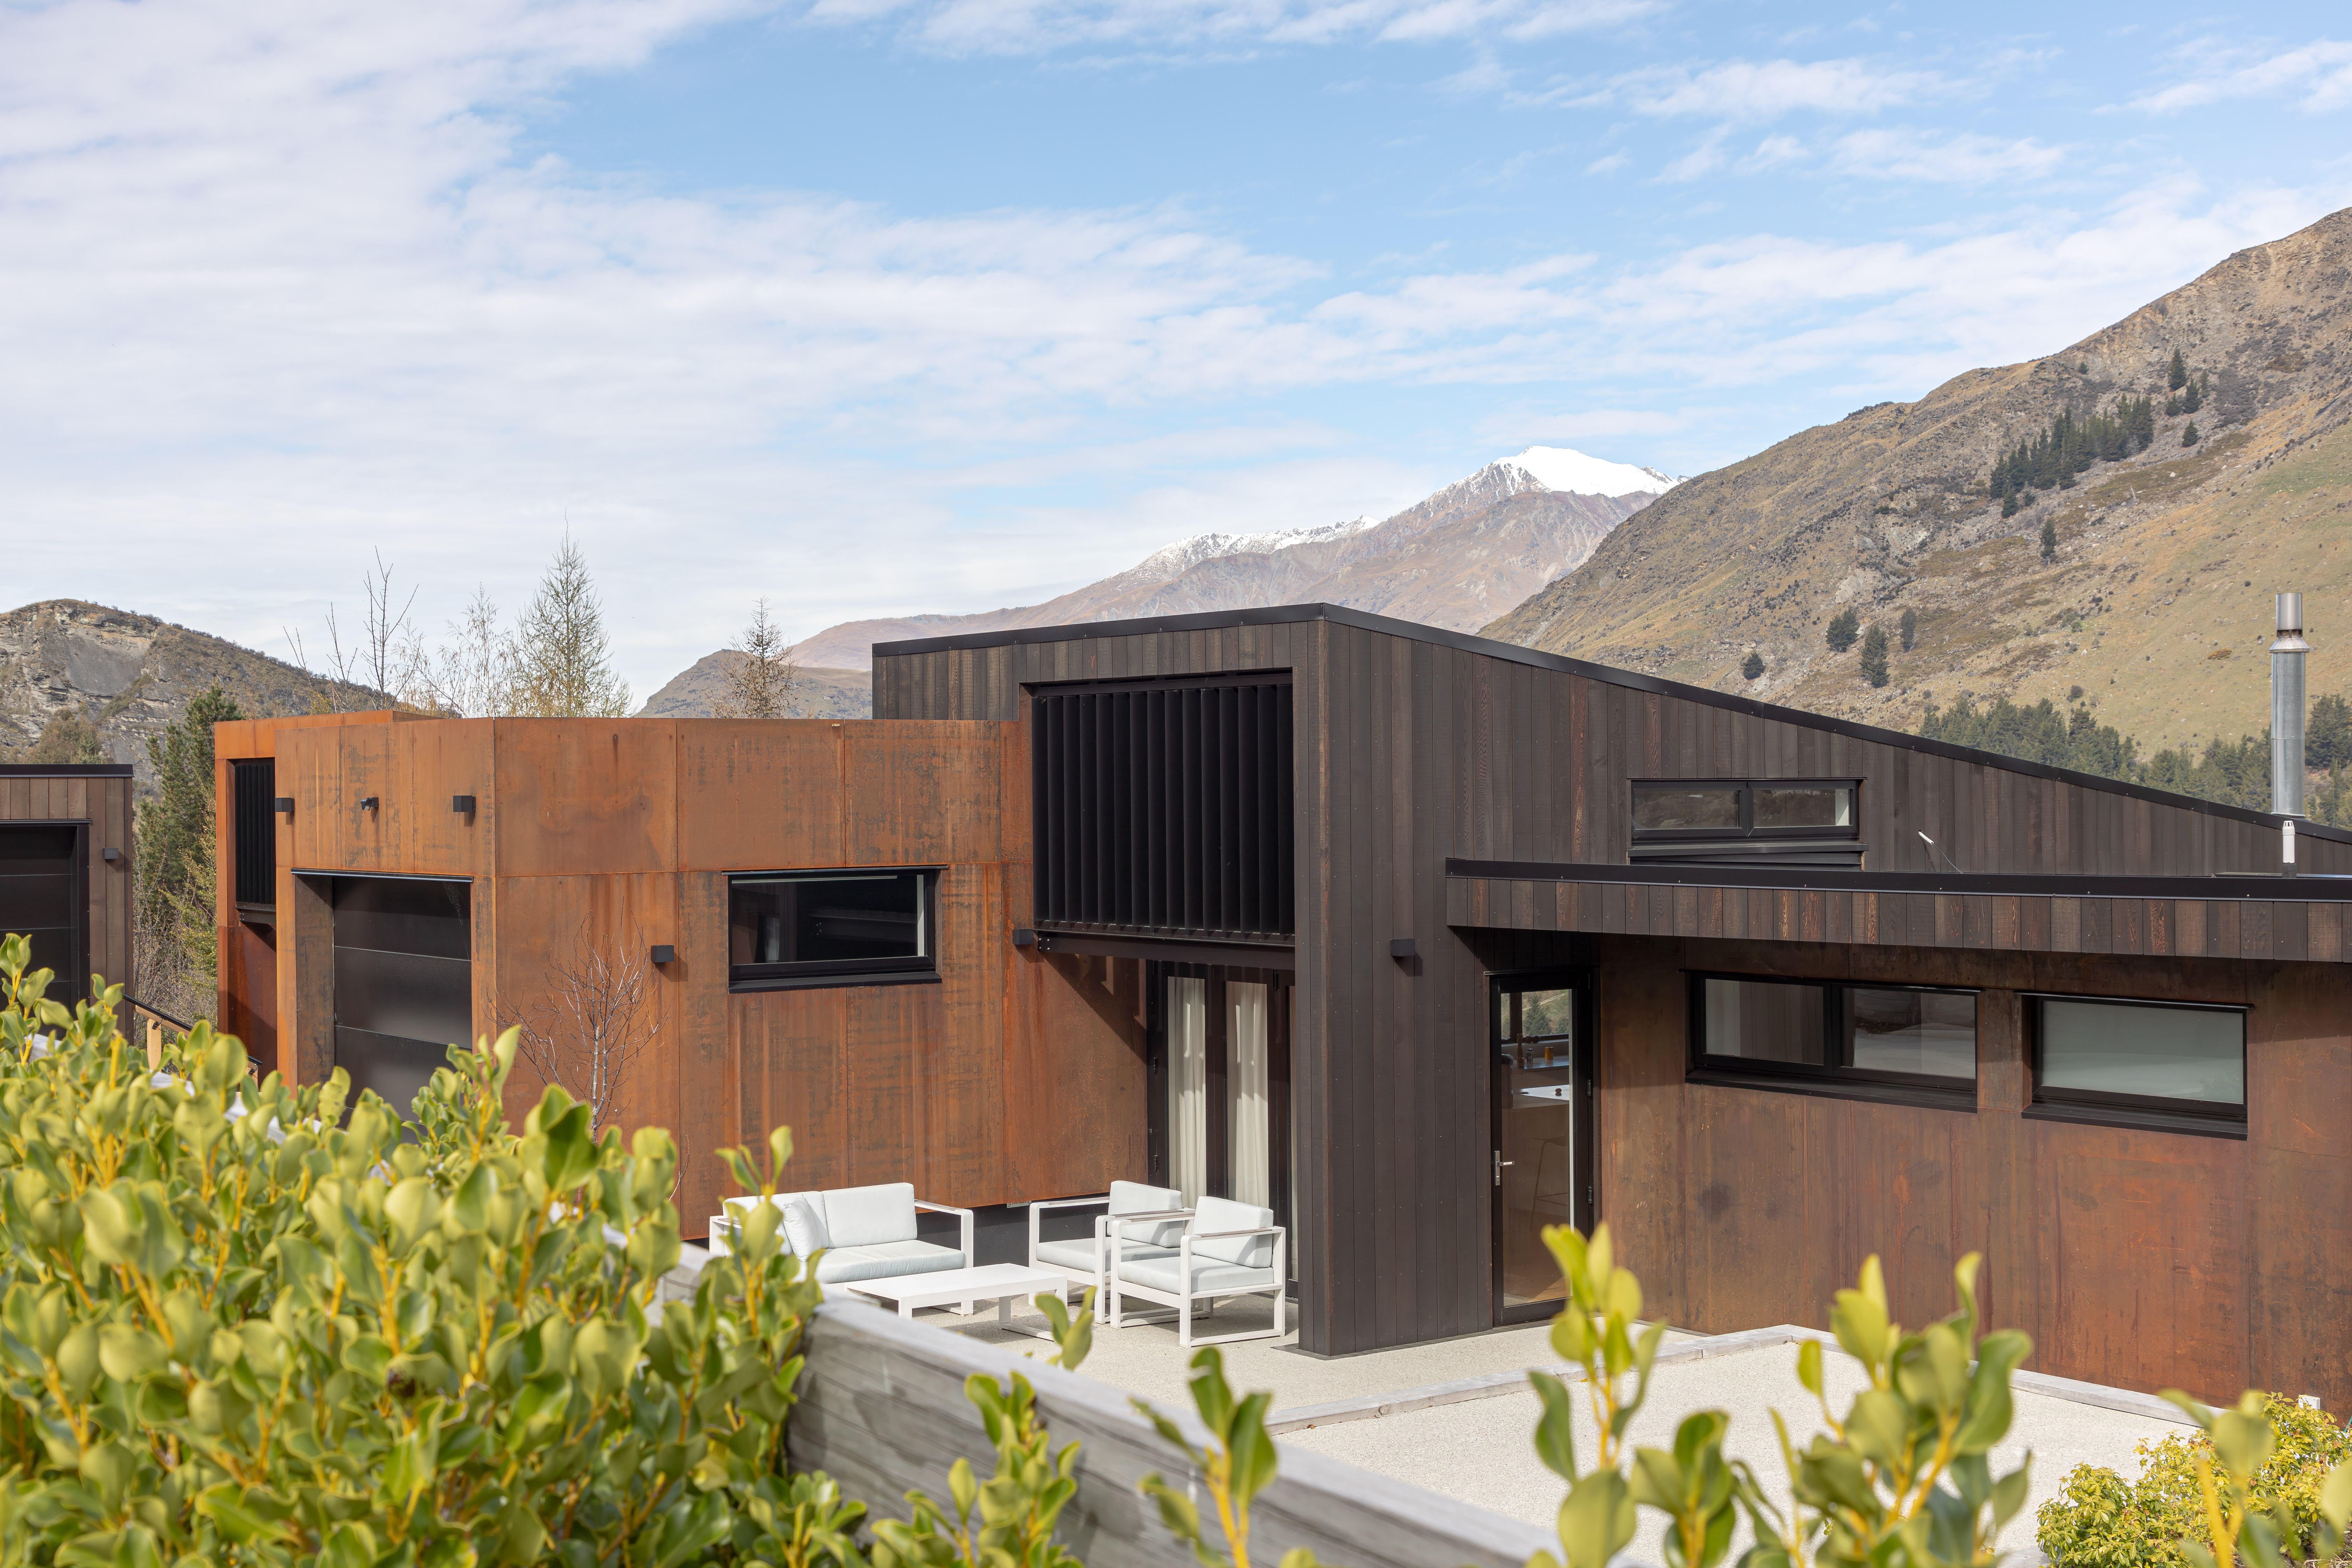 This Arthurs Point, Queenstown home uses corten steel and vertical timber cladding ensuring the house blends into the natural environment. Image by John Williams